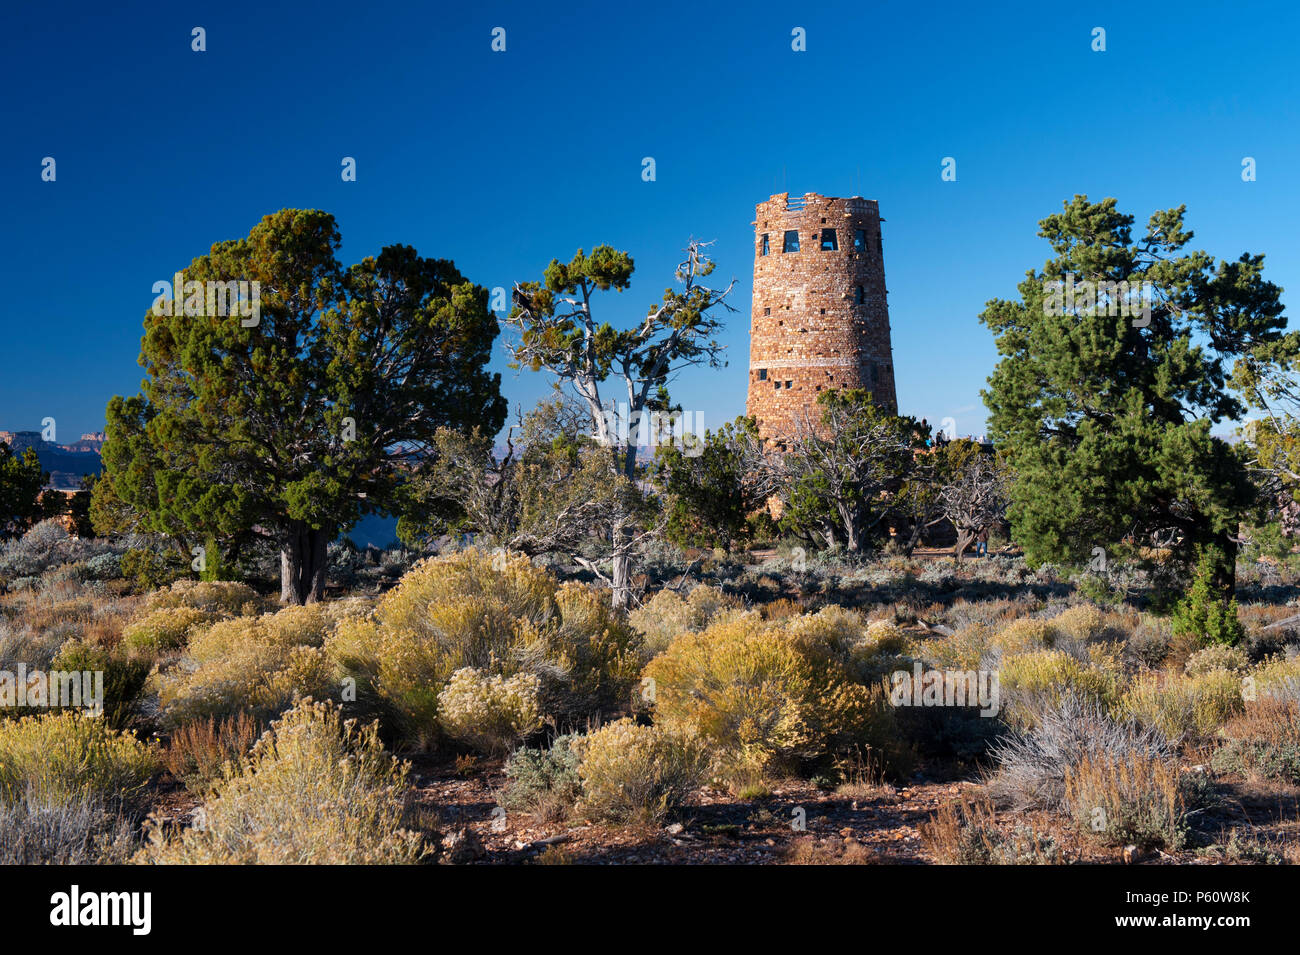 Desert View Watchtower, Grand Canyon South Rim, Arizona, USA. Completed in 1932, it was designed by American architect Mary Colter. Stock Photo